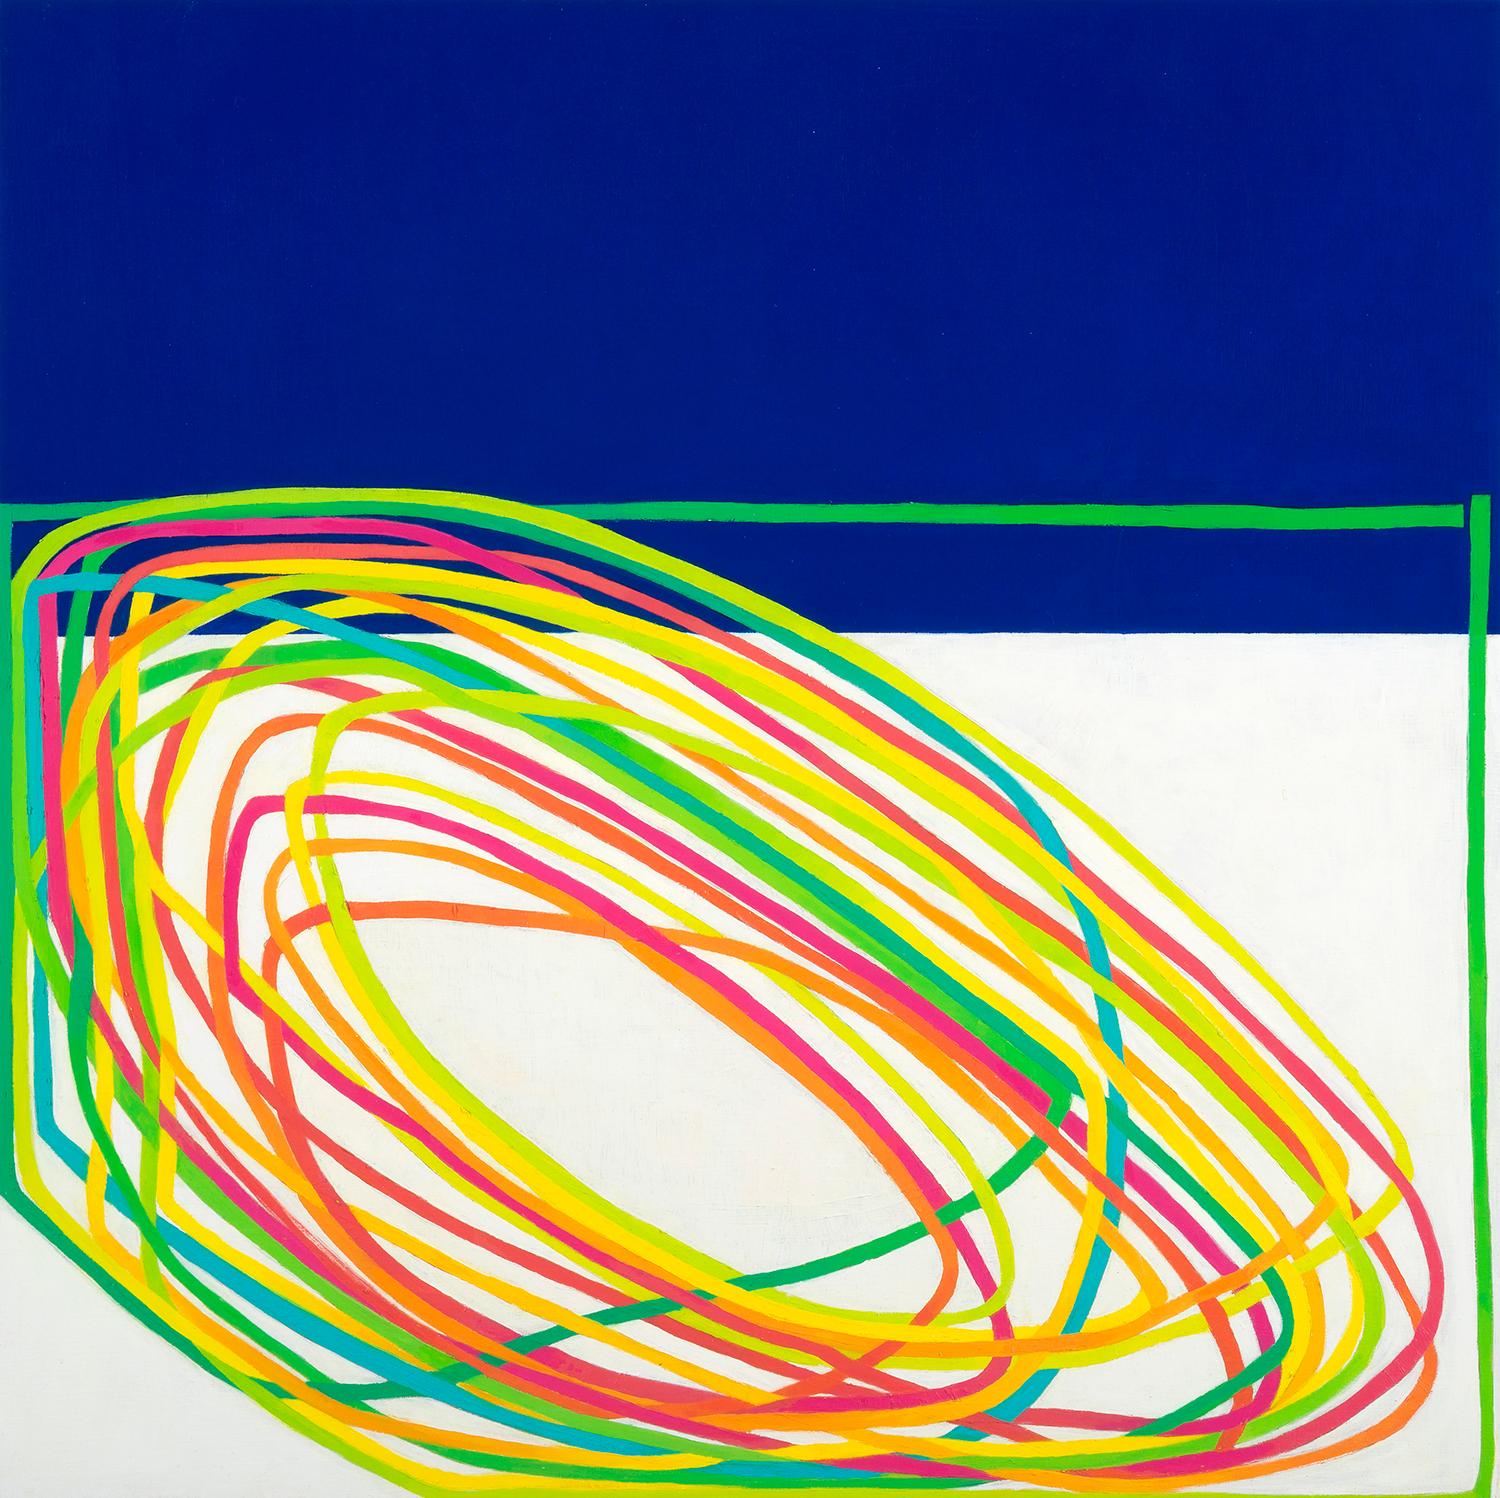 Paula Cahill Abstract Painting - Awry II: oil painting w/ green, yellow, orange & pink line on ocean-blue & white